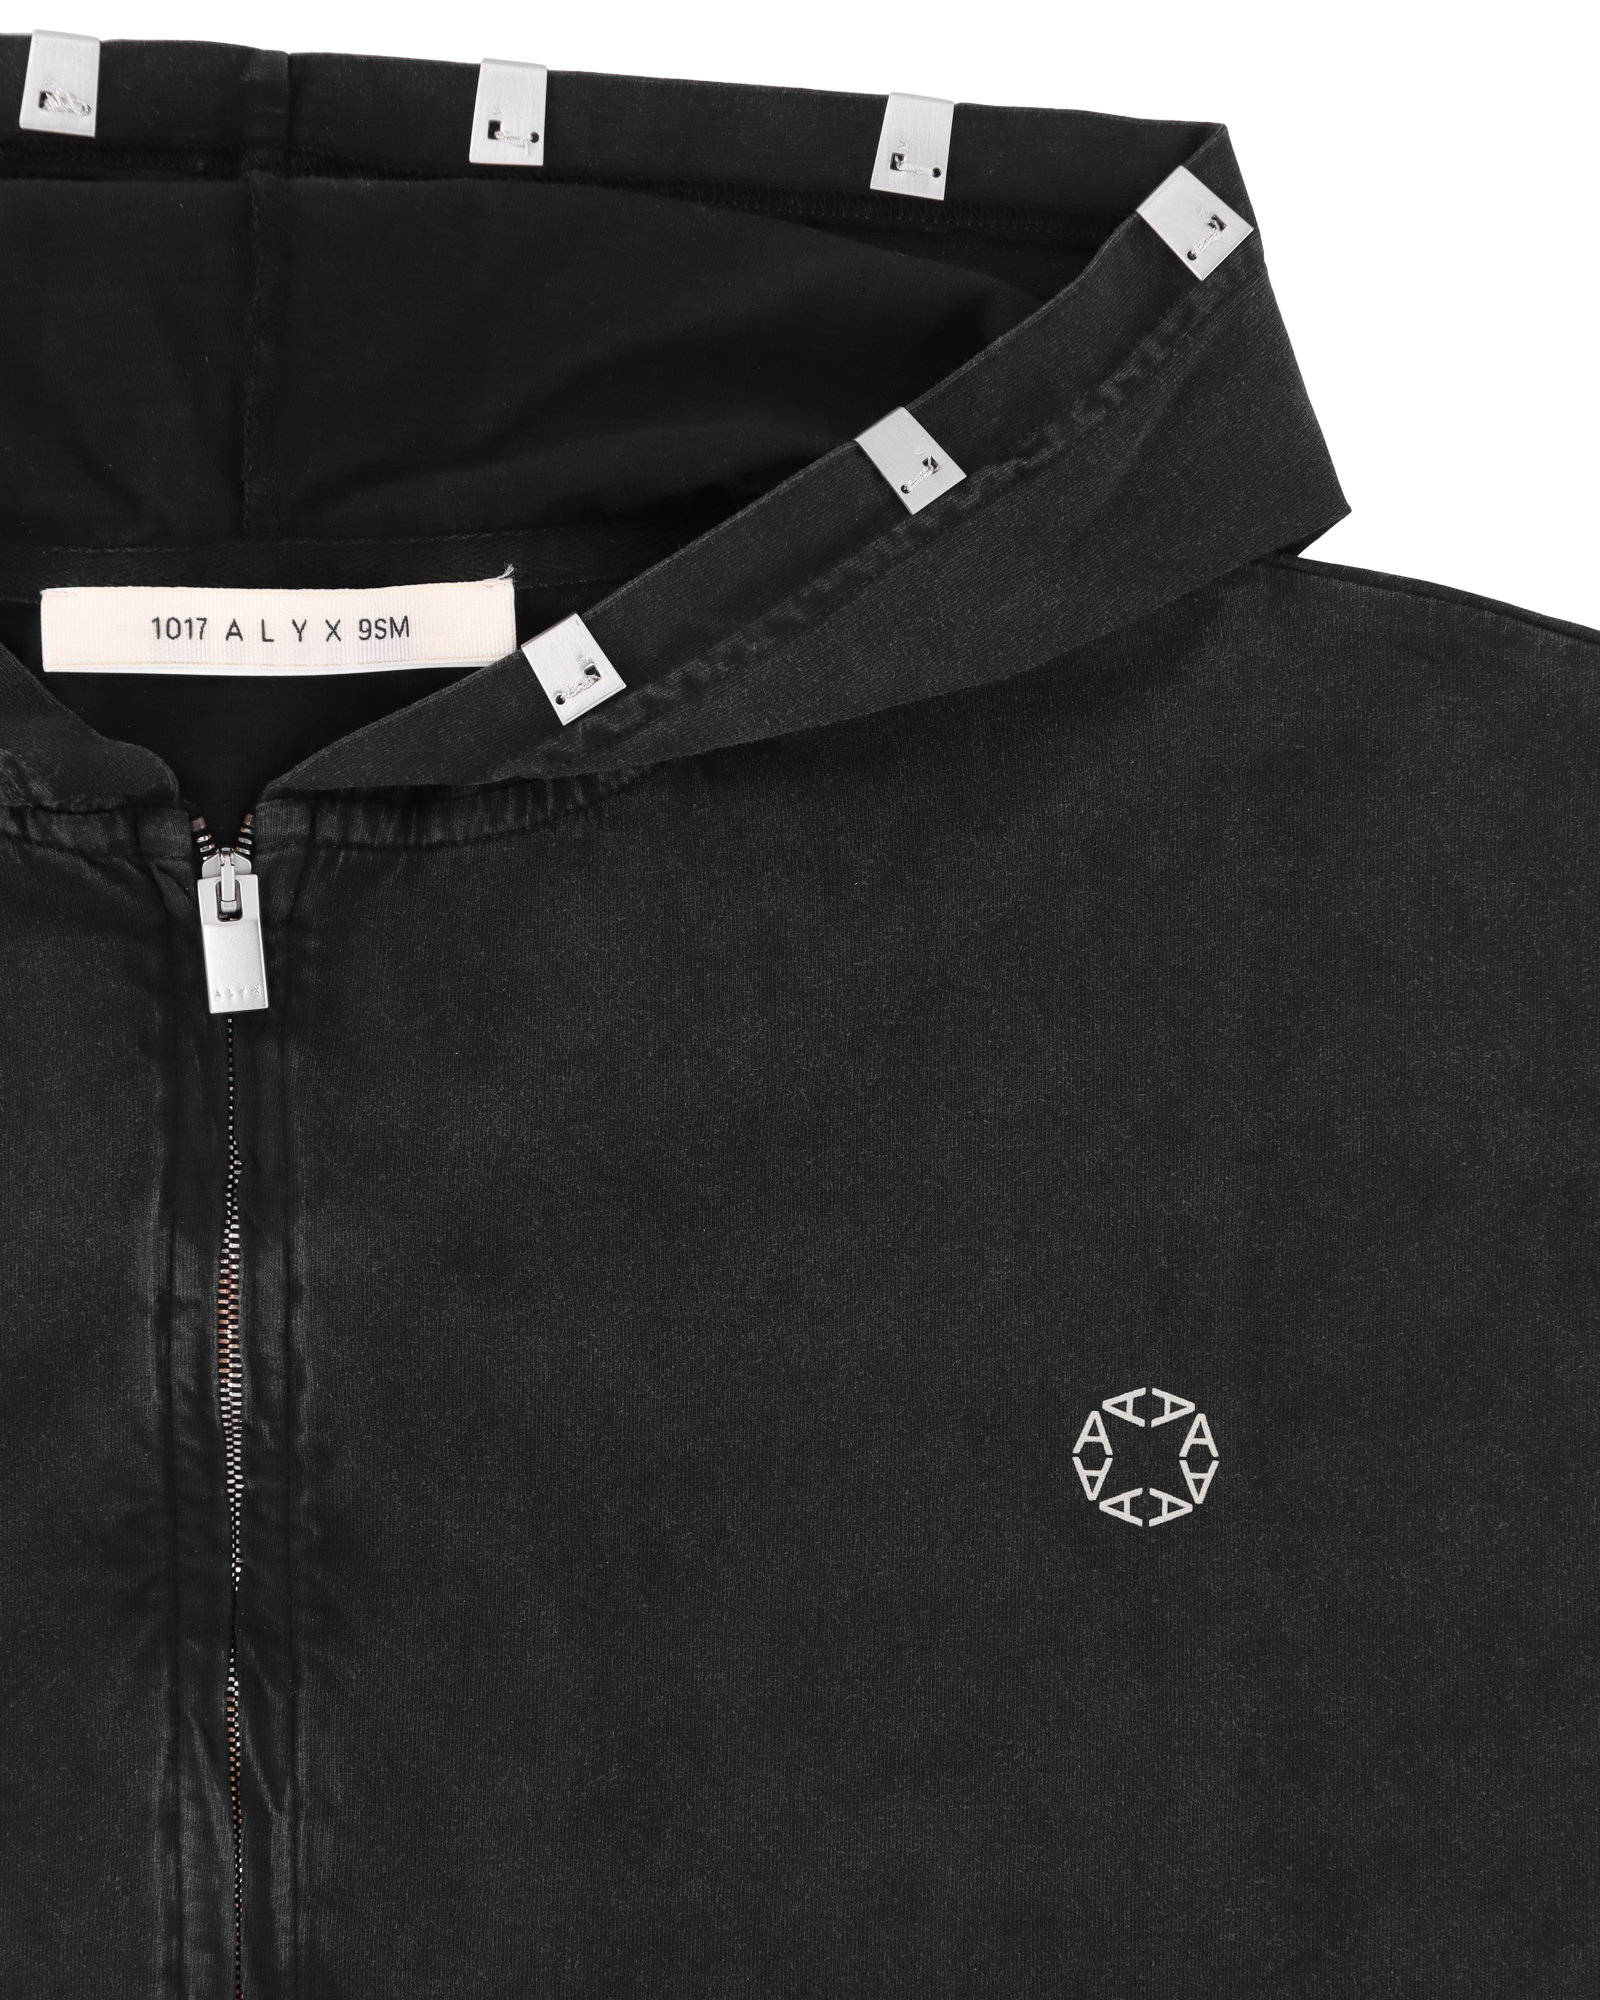 1017 ALYX 9SM | ZIP HOODIE WITH LIGTHERCAP DETAILING | T-SHIRTS